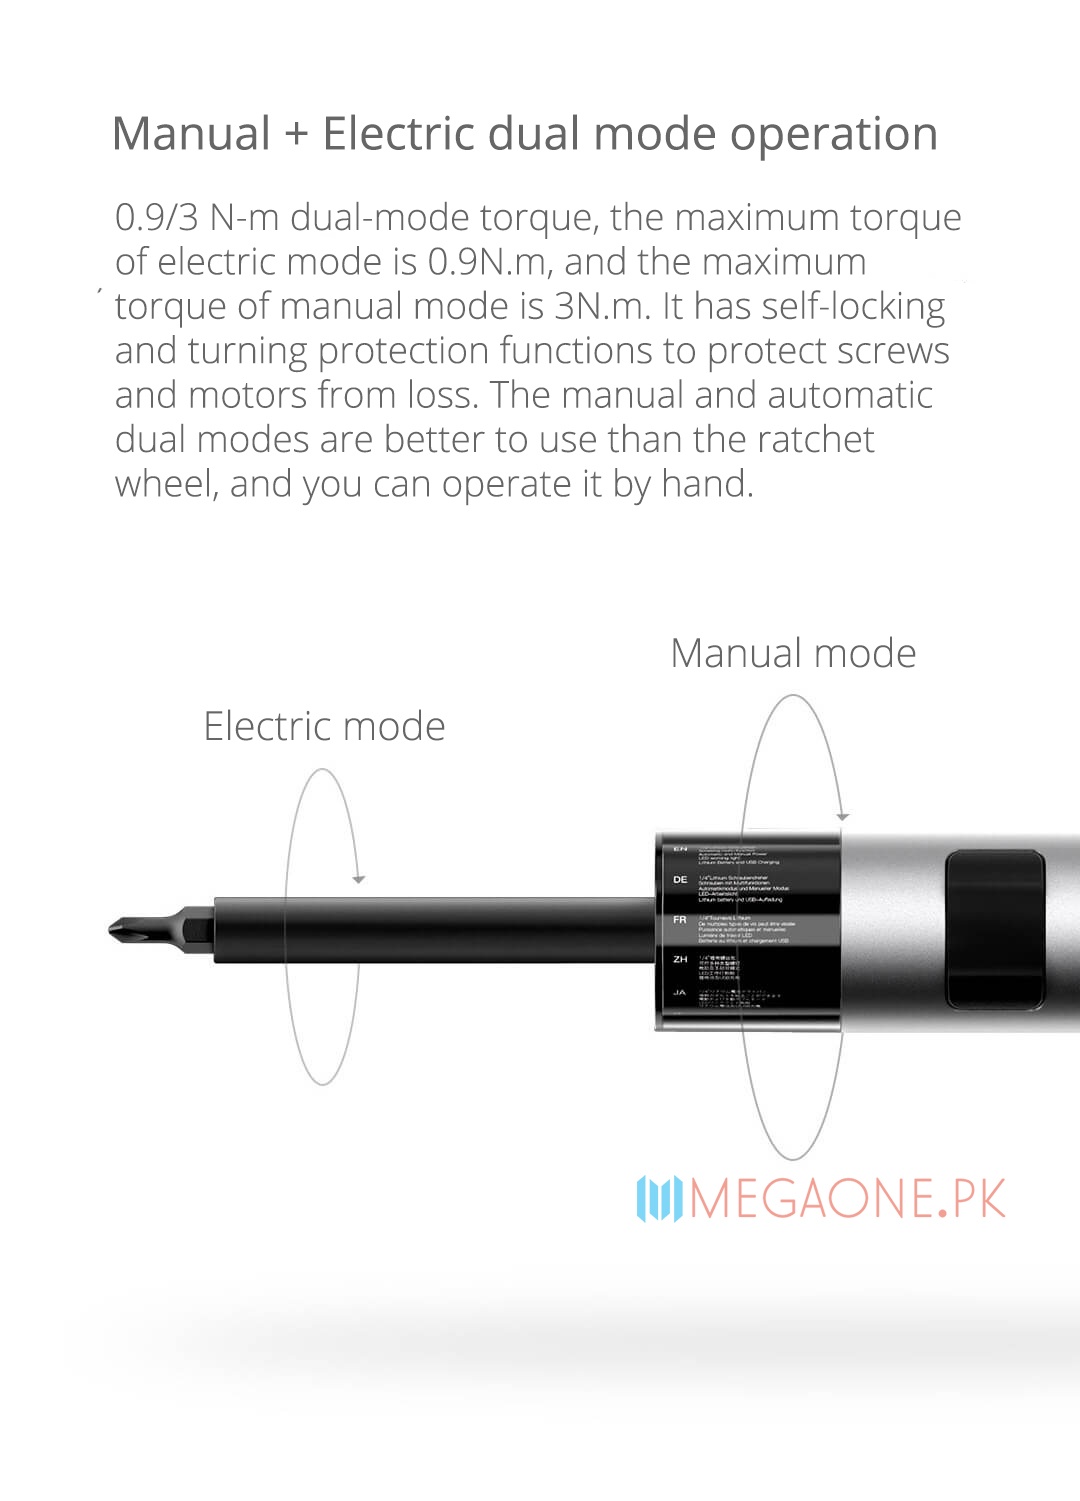 0.9/3 N-m dual-mode torque, the maximum torque of electric mode is 0.9N.m, and the maximum torque of manual mode is 3N.m. It has self-locking and turning protection functions to protect screws and motors from loss. The manual and automatic dual modes are better to use than the ratchet wheel, and you can operate it by hand.